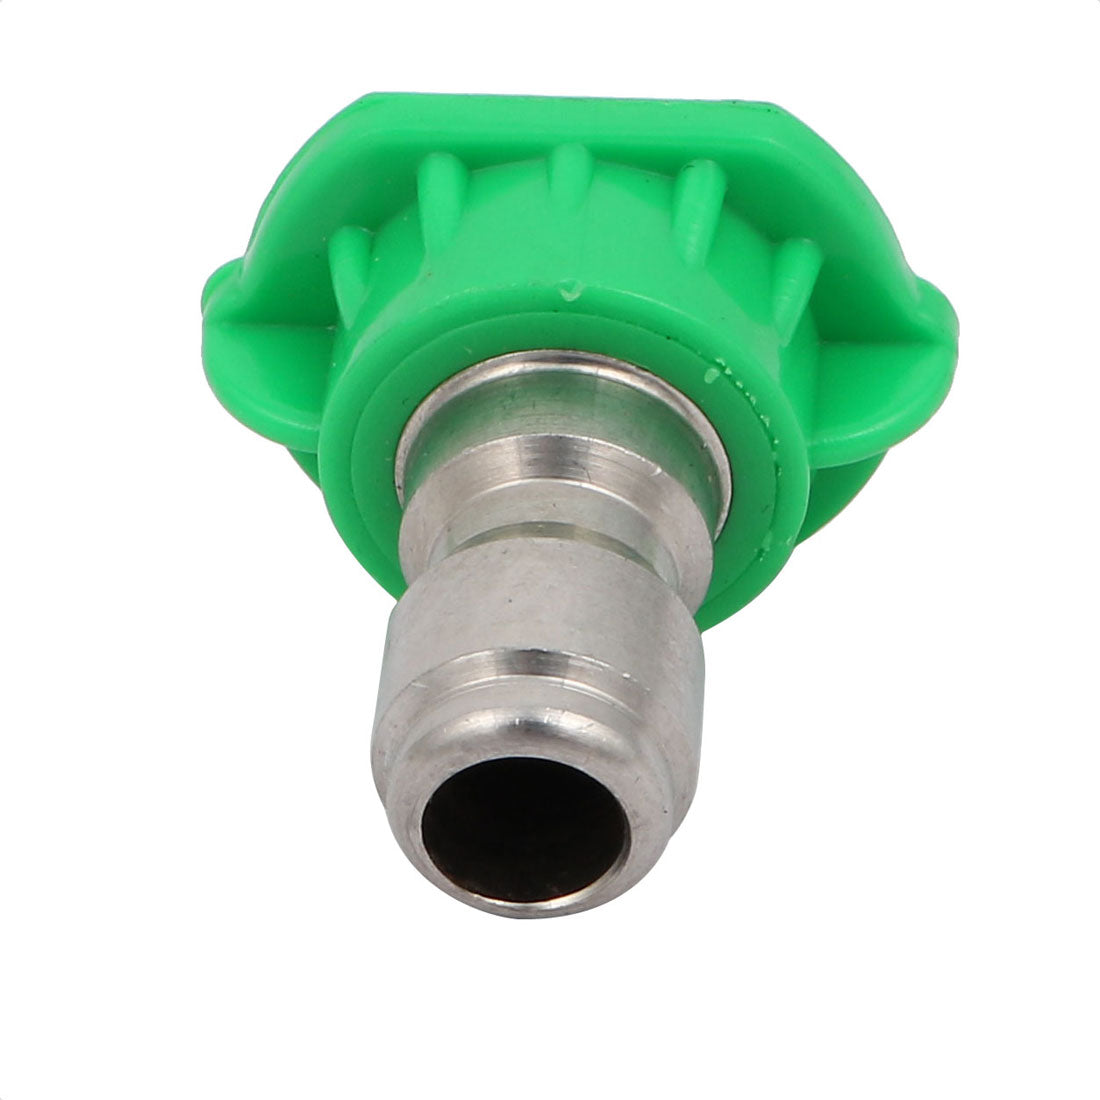 uxcell Uxcell 1mm Dia 25 Degree  Nozzle Universal Pressure  Accessories Green 3pcs